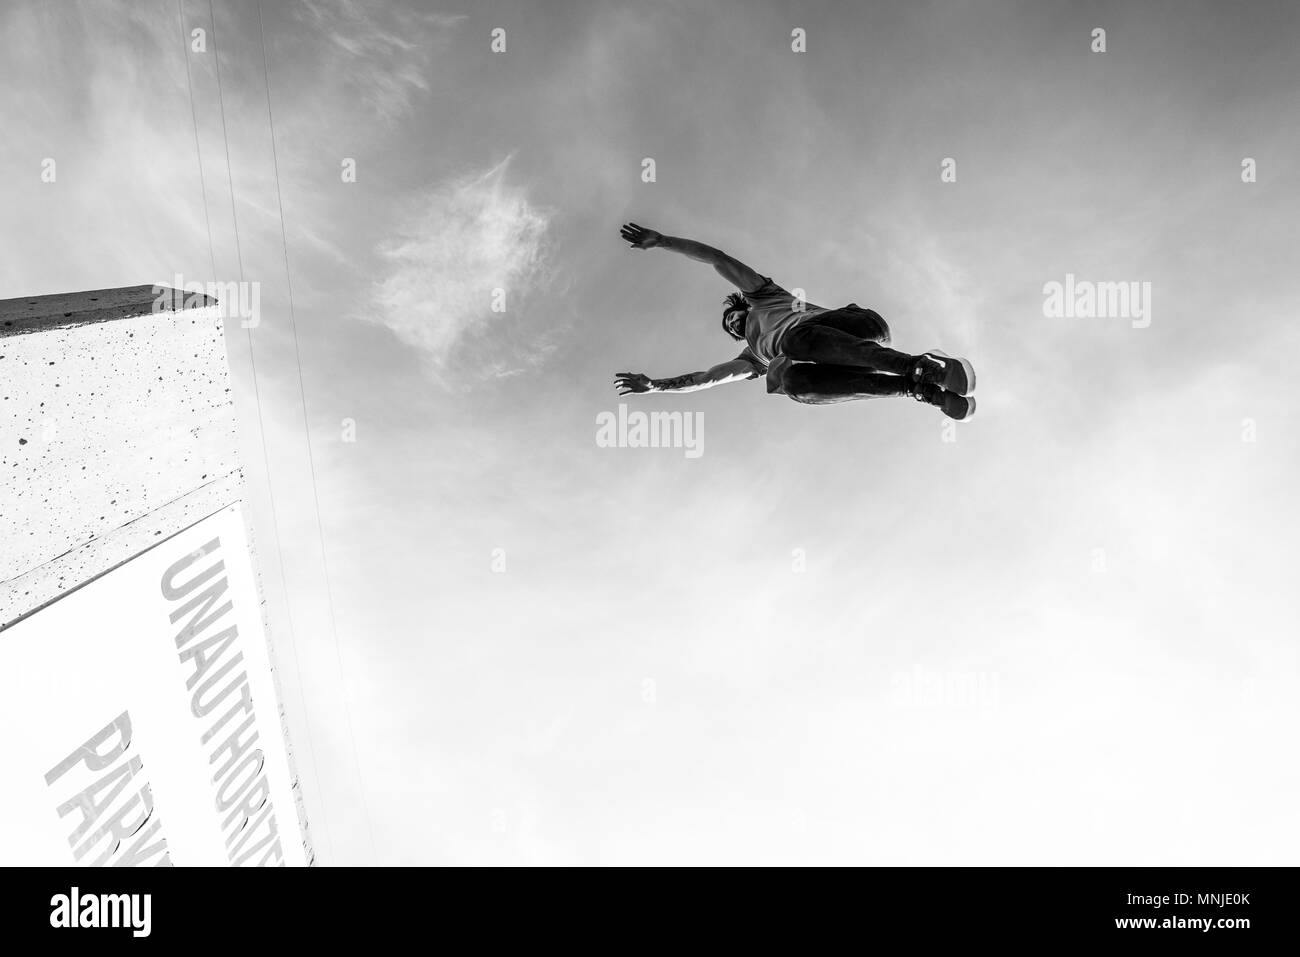 Park athlete jumping high gap in parking lot in downtown Denver, Colorado, USA Stock Photo